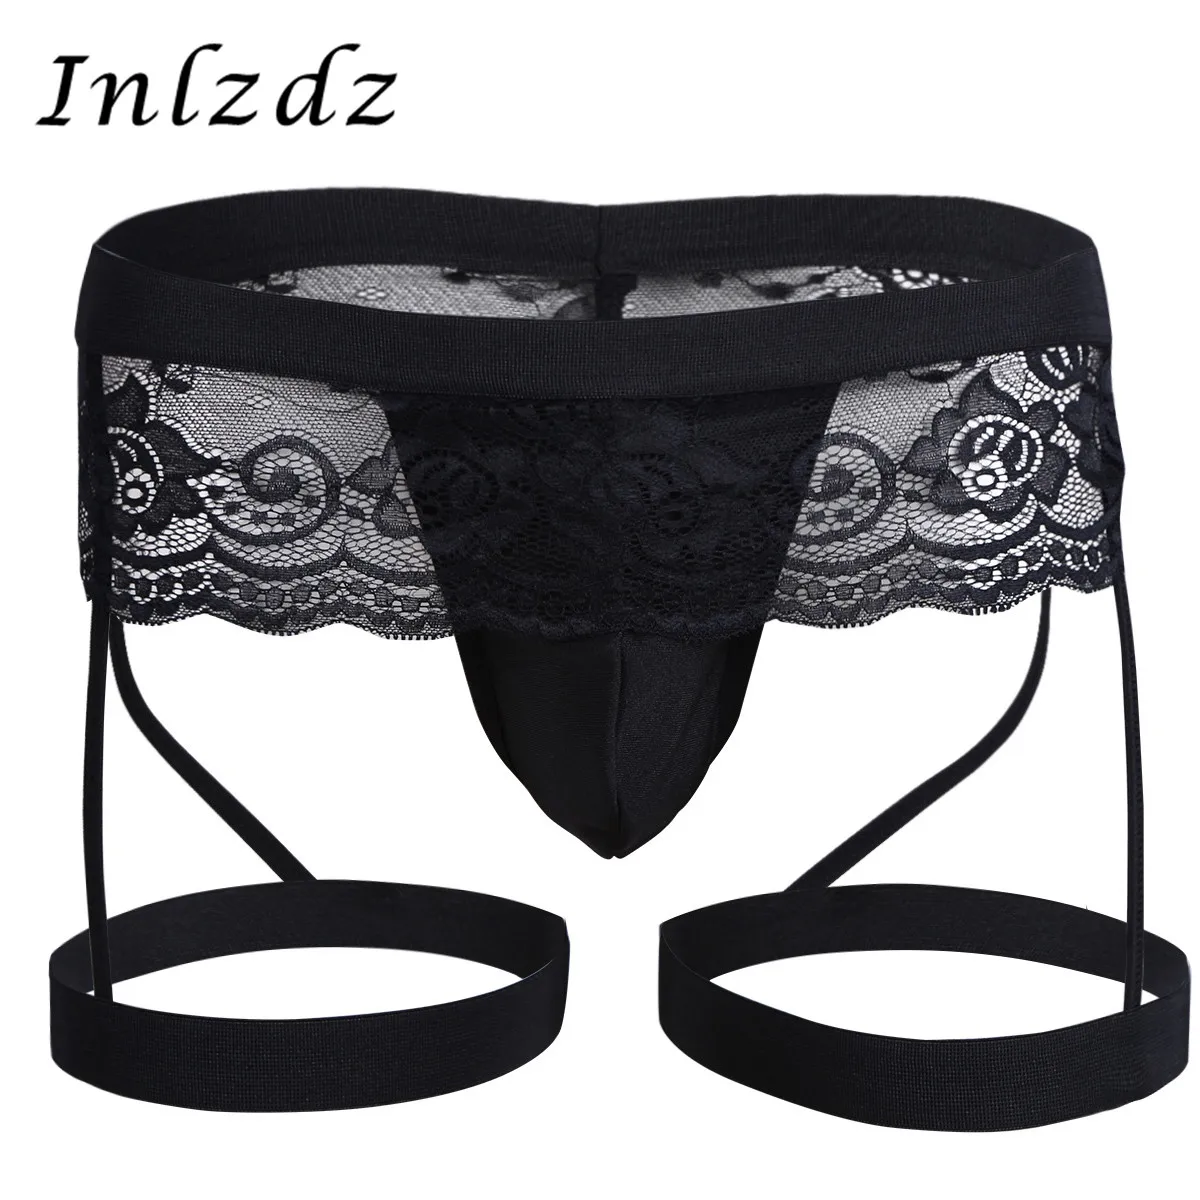 

Sexy Mens Lingerie Sissy Lace Underwear Lace G-string Bikini Briefs Underwear Underpants with Garter Hot Sexy Gay Homme Panties